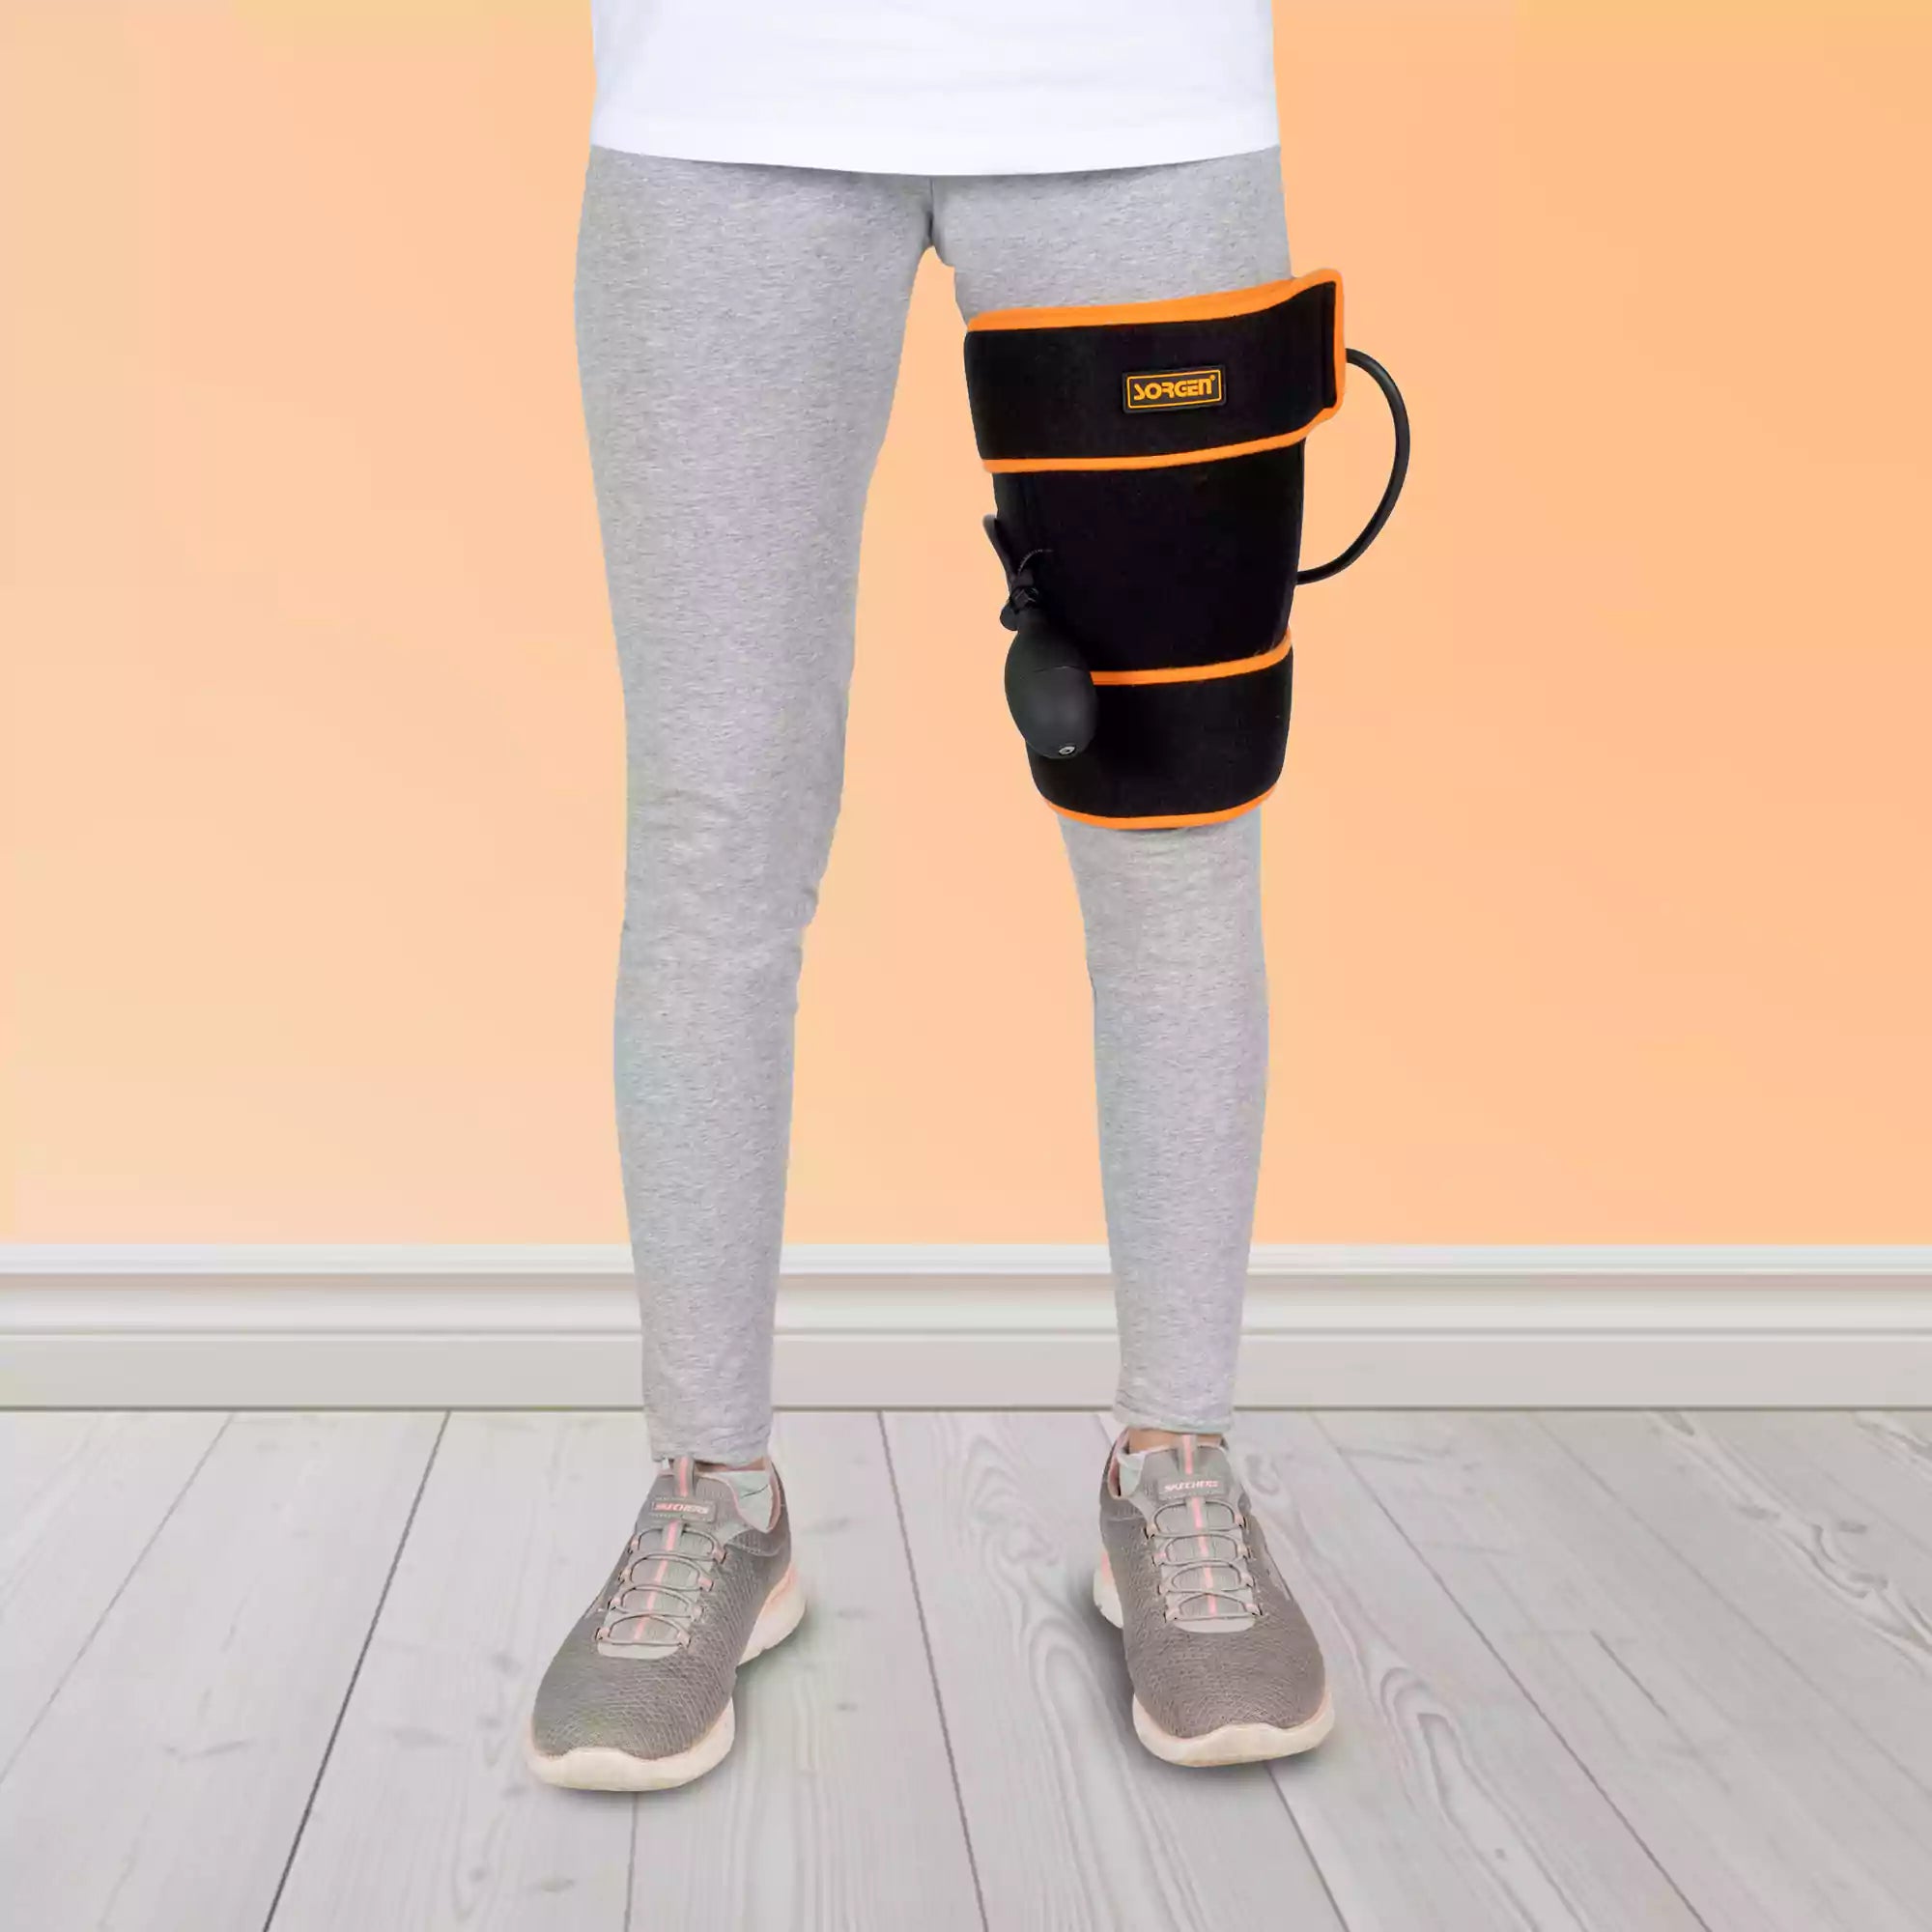 thigh support wrap